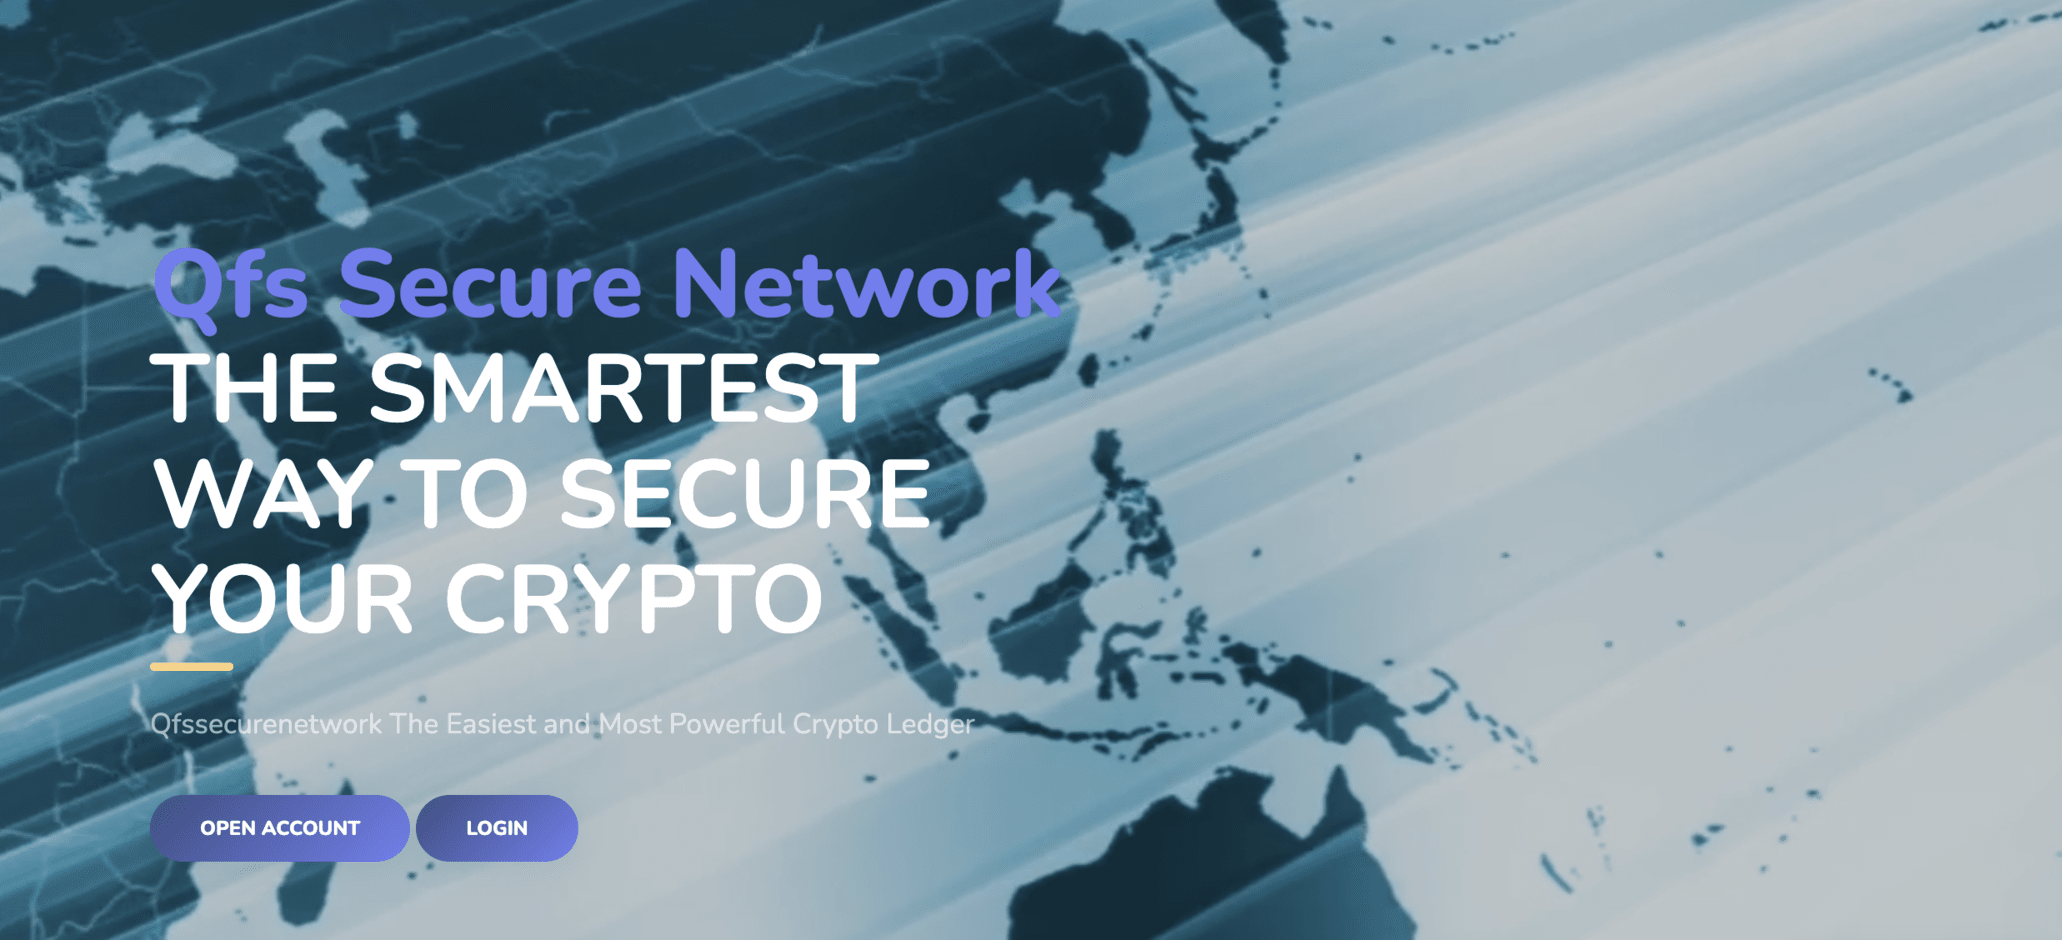 Qfs Secure Network cover